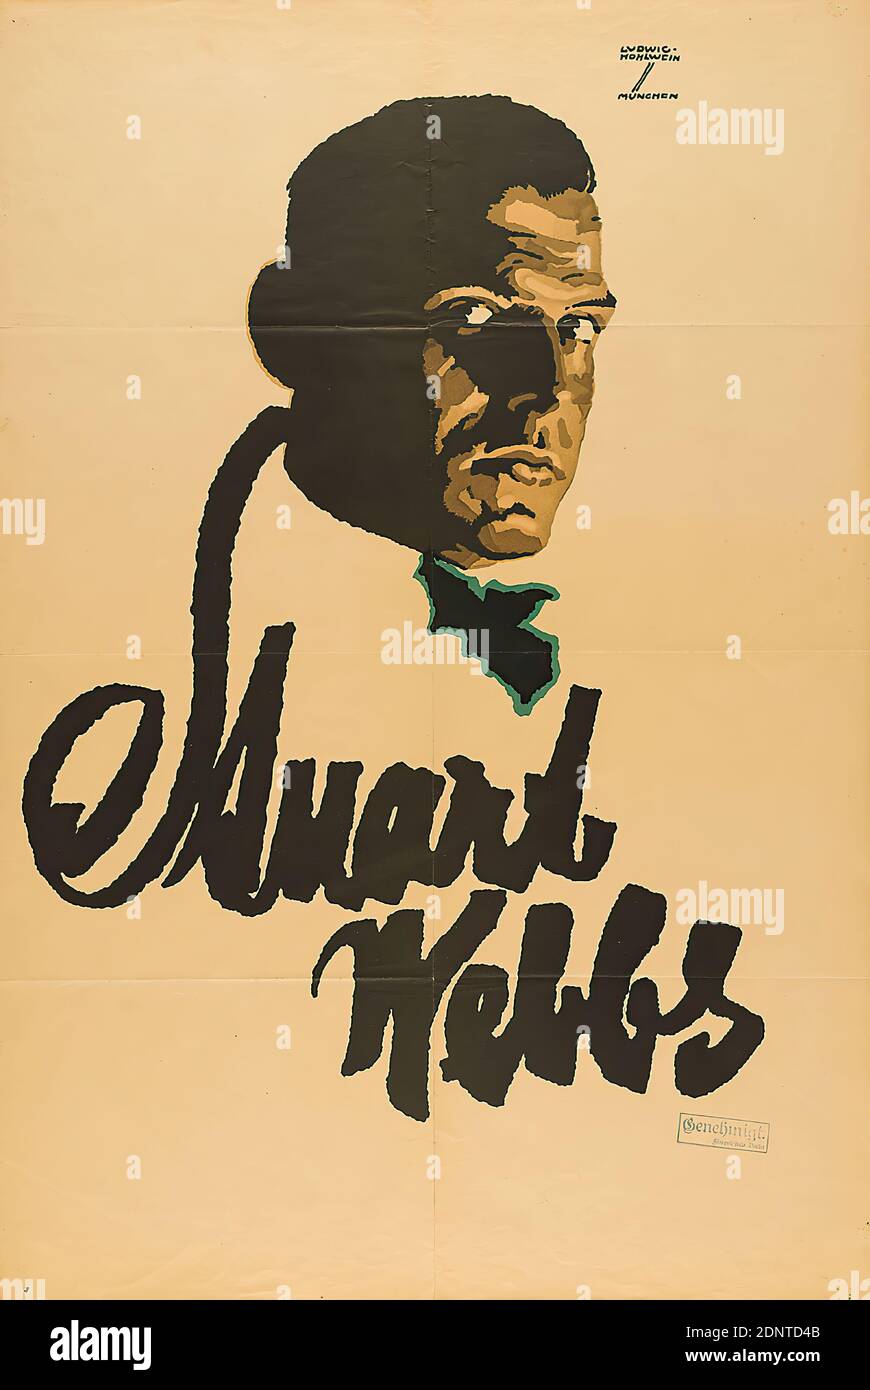 Ludwig Hohlwein, Stuart Webbs, paper, lithography, total: height: 89,5 cm; width: 60,5 cm, signed: recto o. r. in print: LUDWIG HOHLWEIN, MÜNCHEN, stamp: u. r.: Approved Filmprüfstelle Berlin, handwritten: George Bully, film posters, portrait, film actor, actress, film/film screening, cinematography, Ernst Reicher Stock Photo